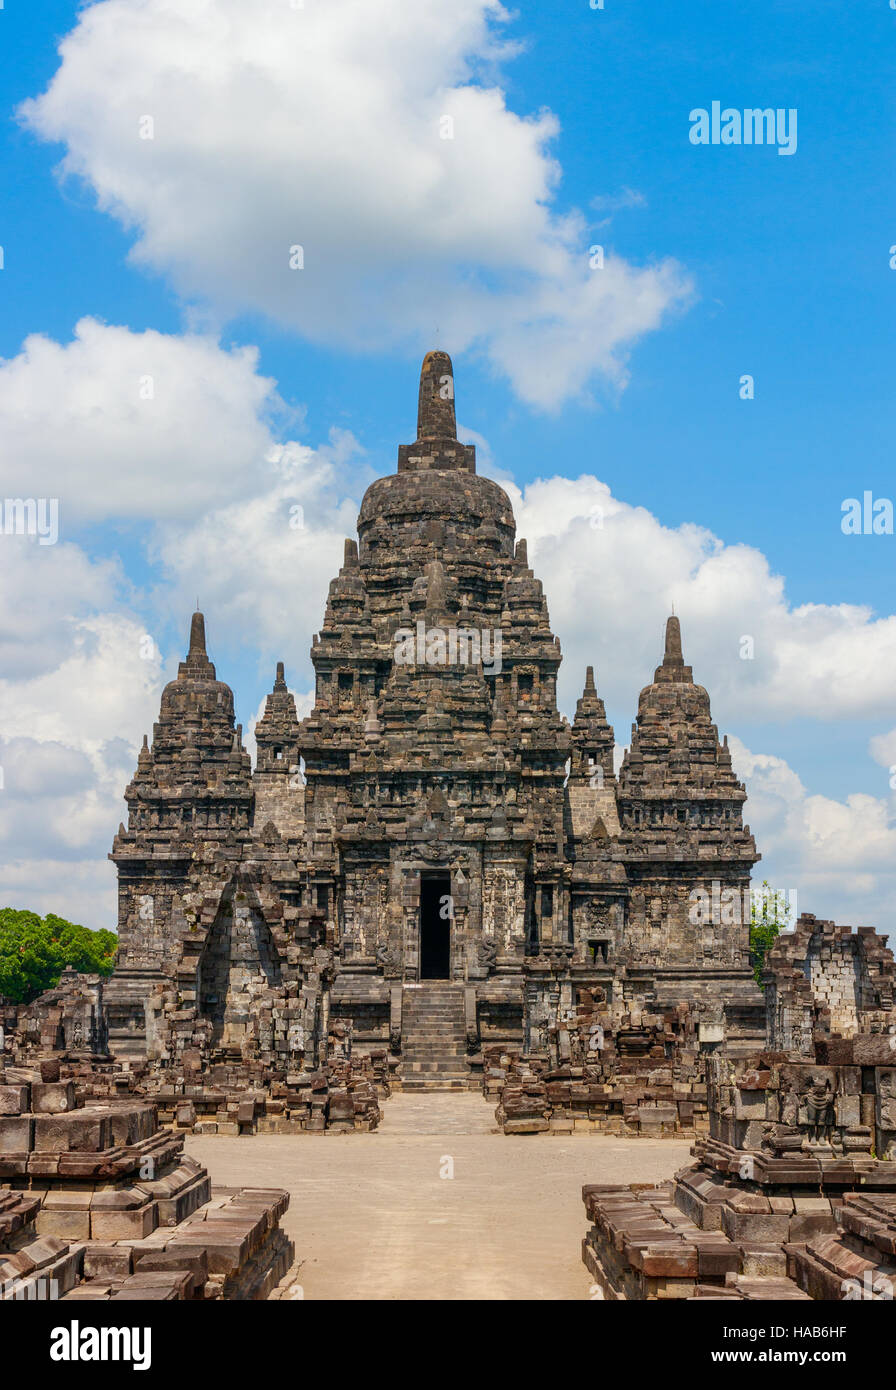 View of the Sewu temple complex under a blue sky with clouds. Java, Indonesia. Stock Photo